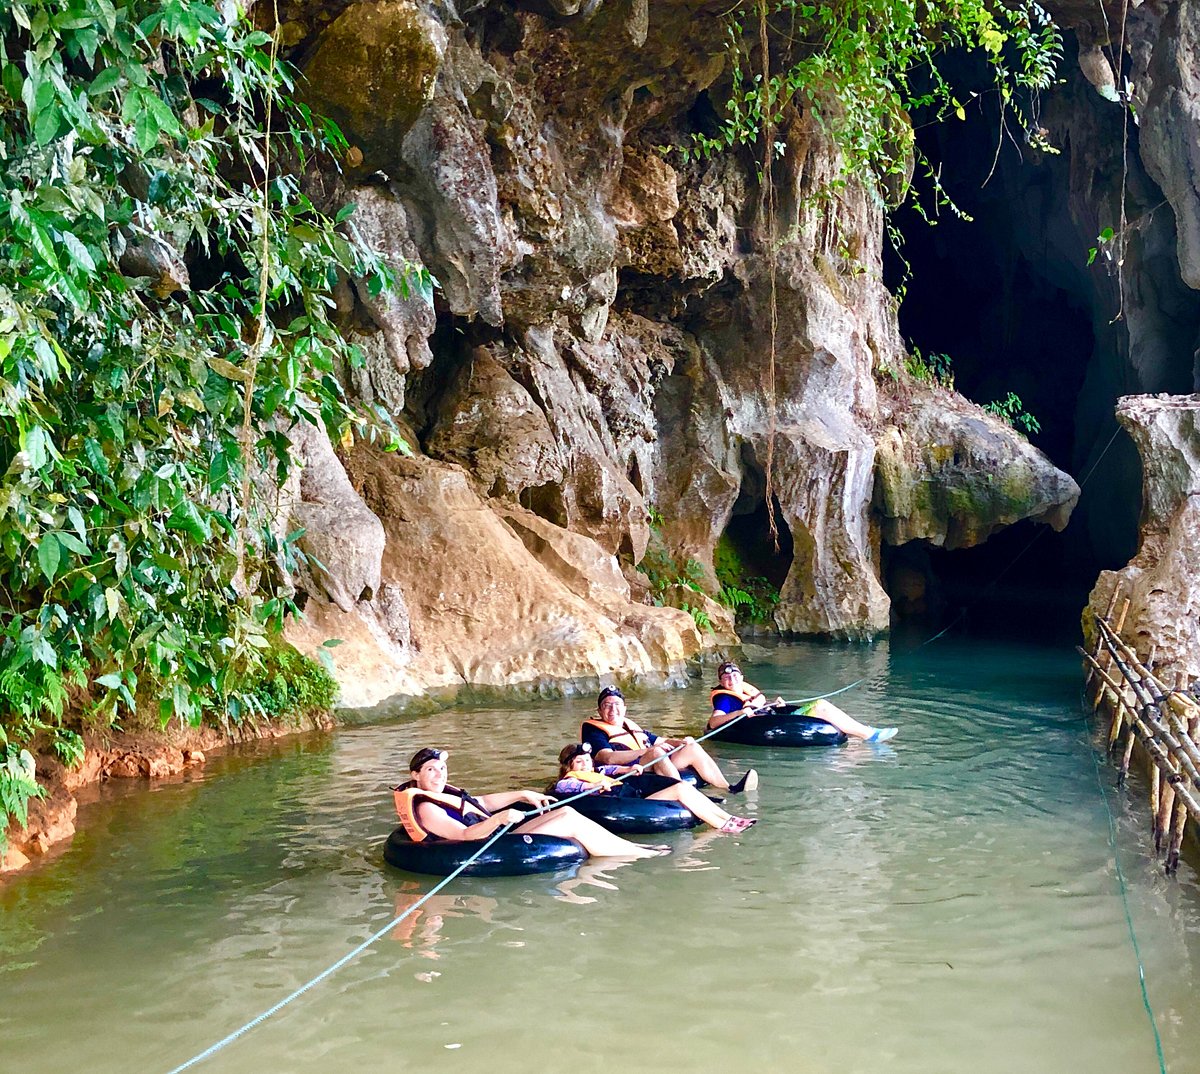 Vientiane – Vang Vieng by express train.